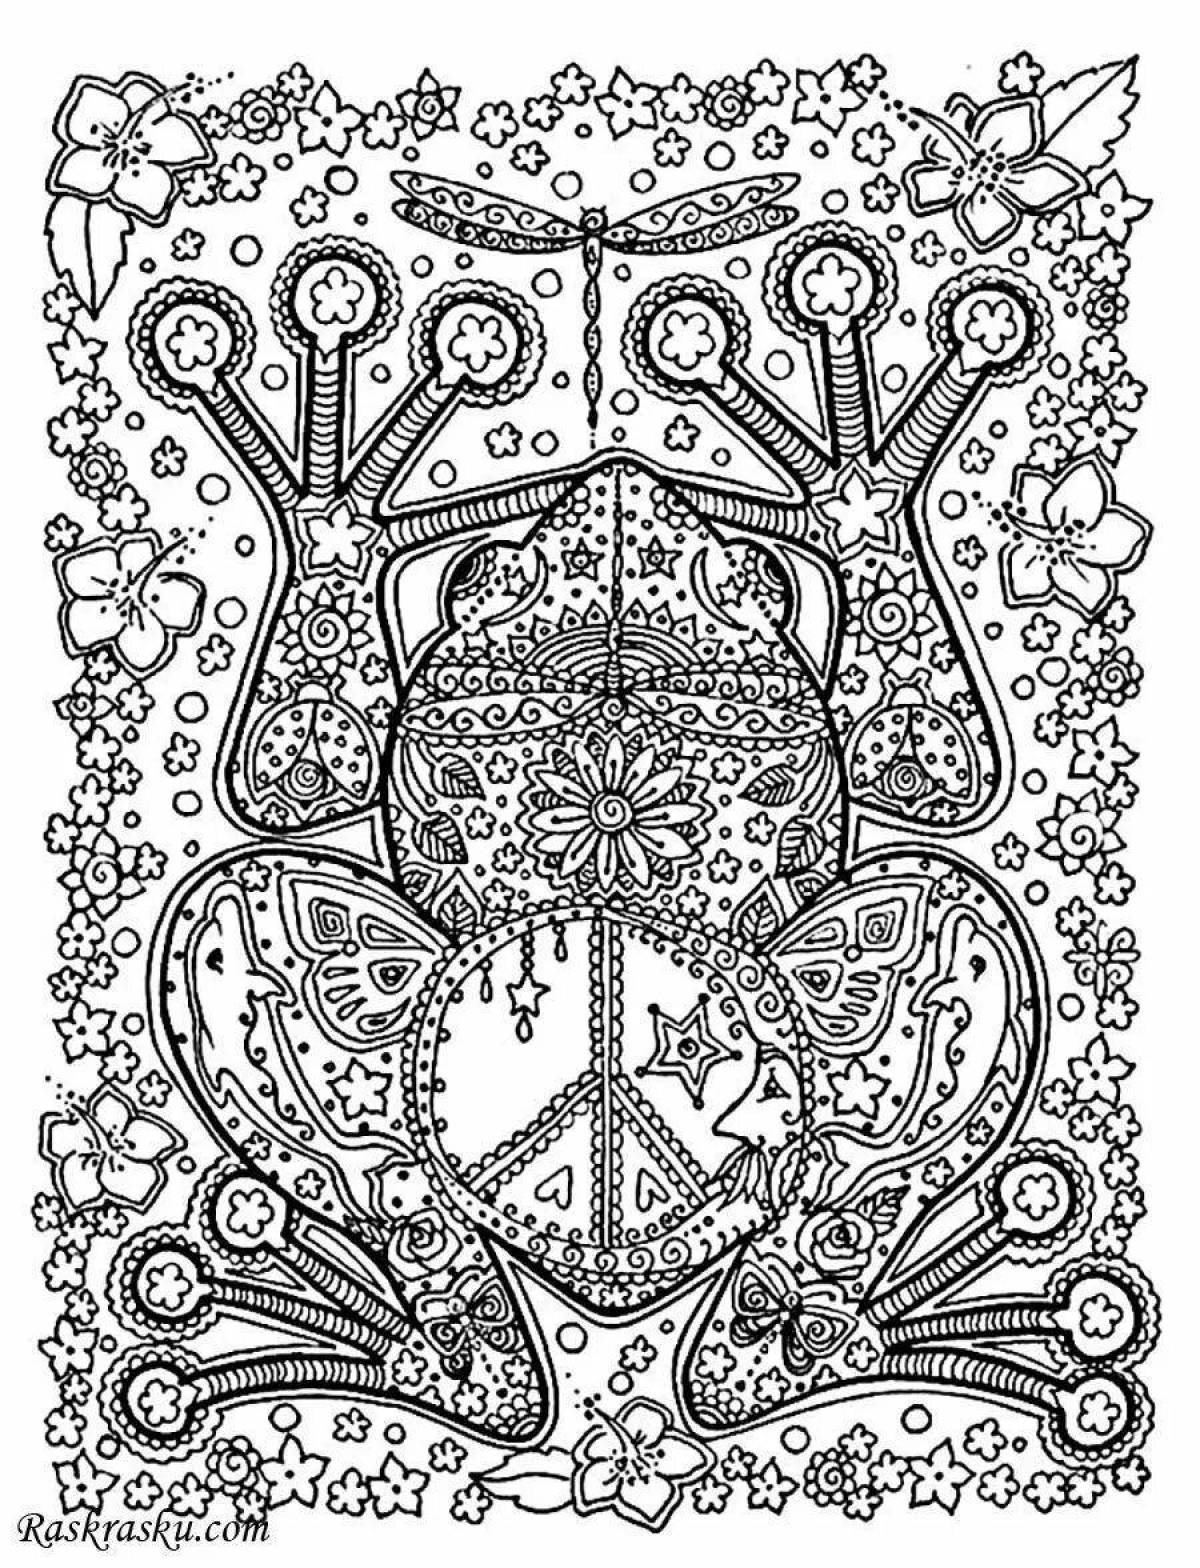 Calm coloring book, meditative for adults